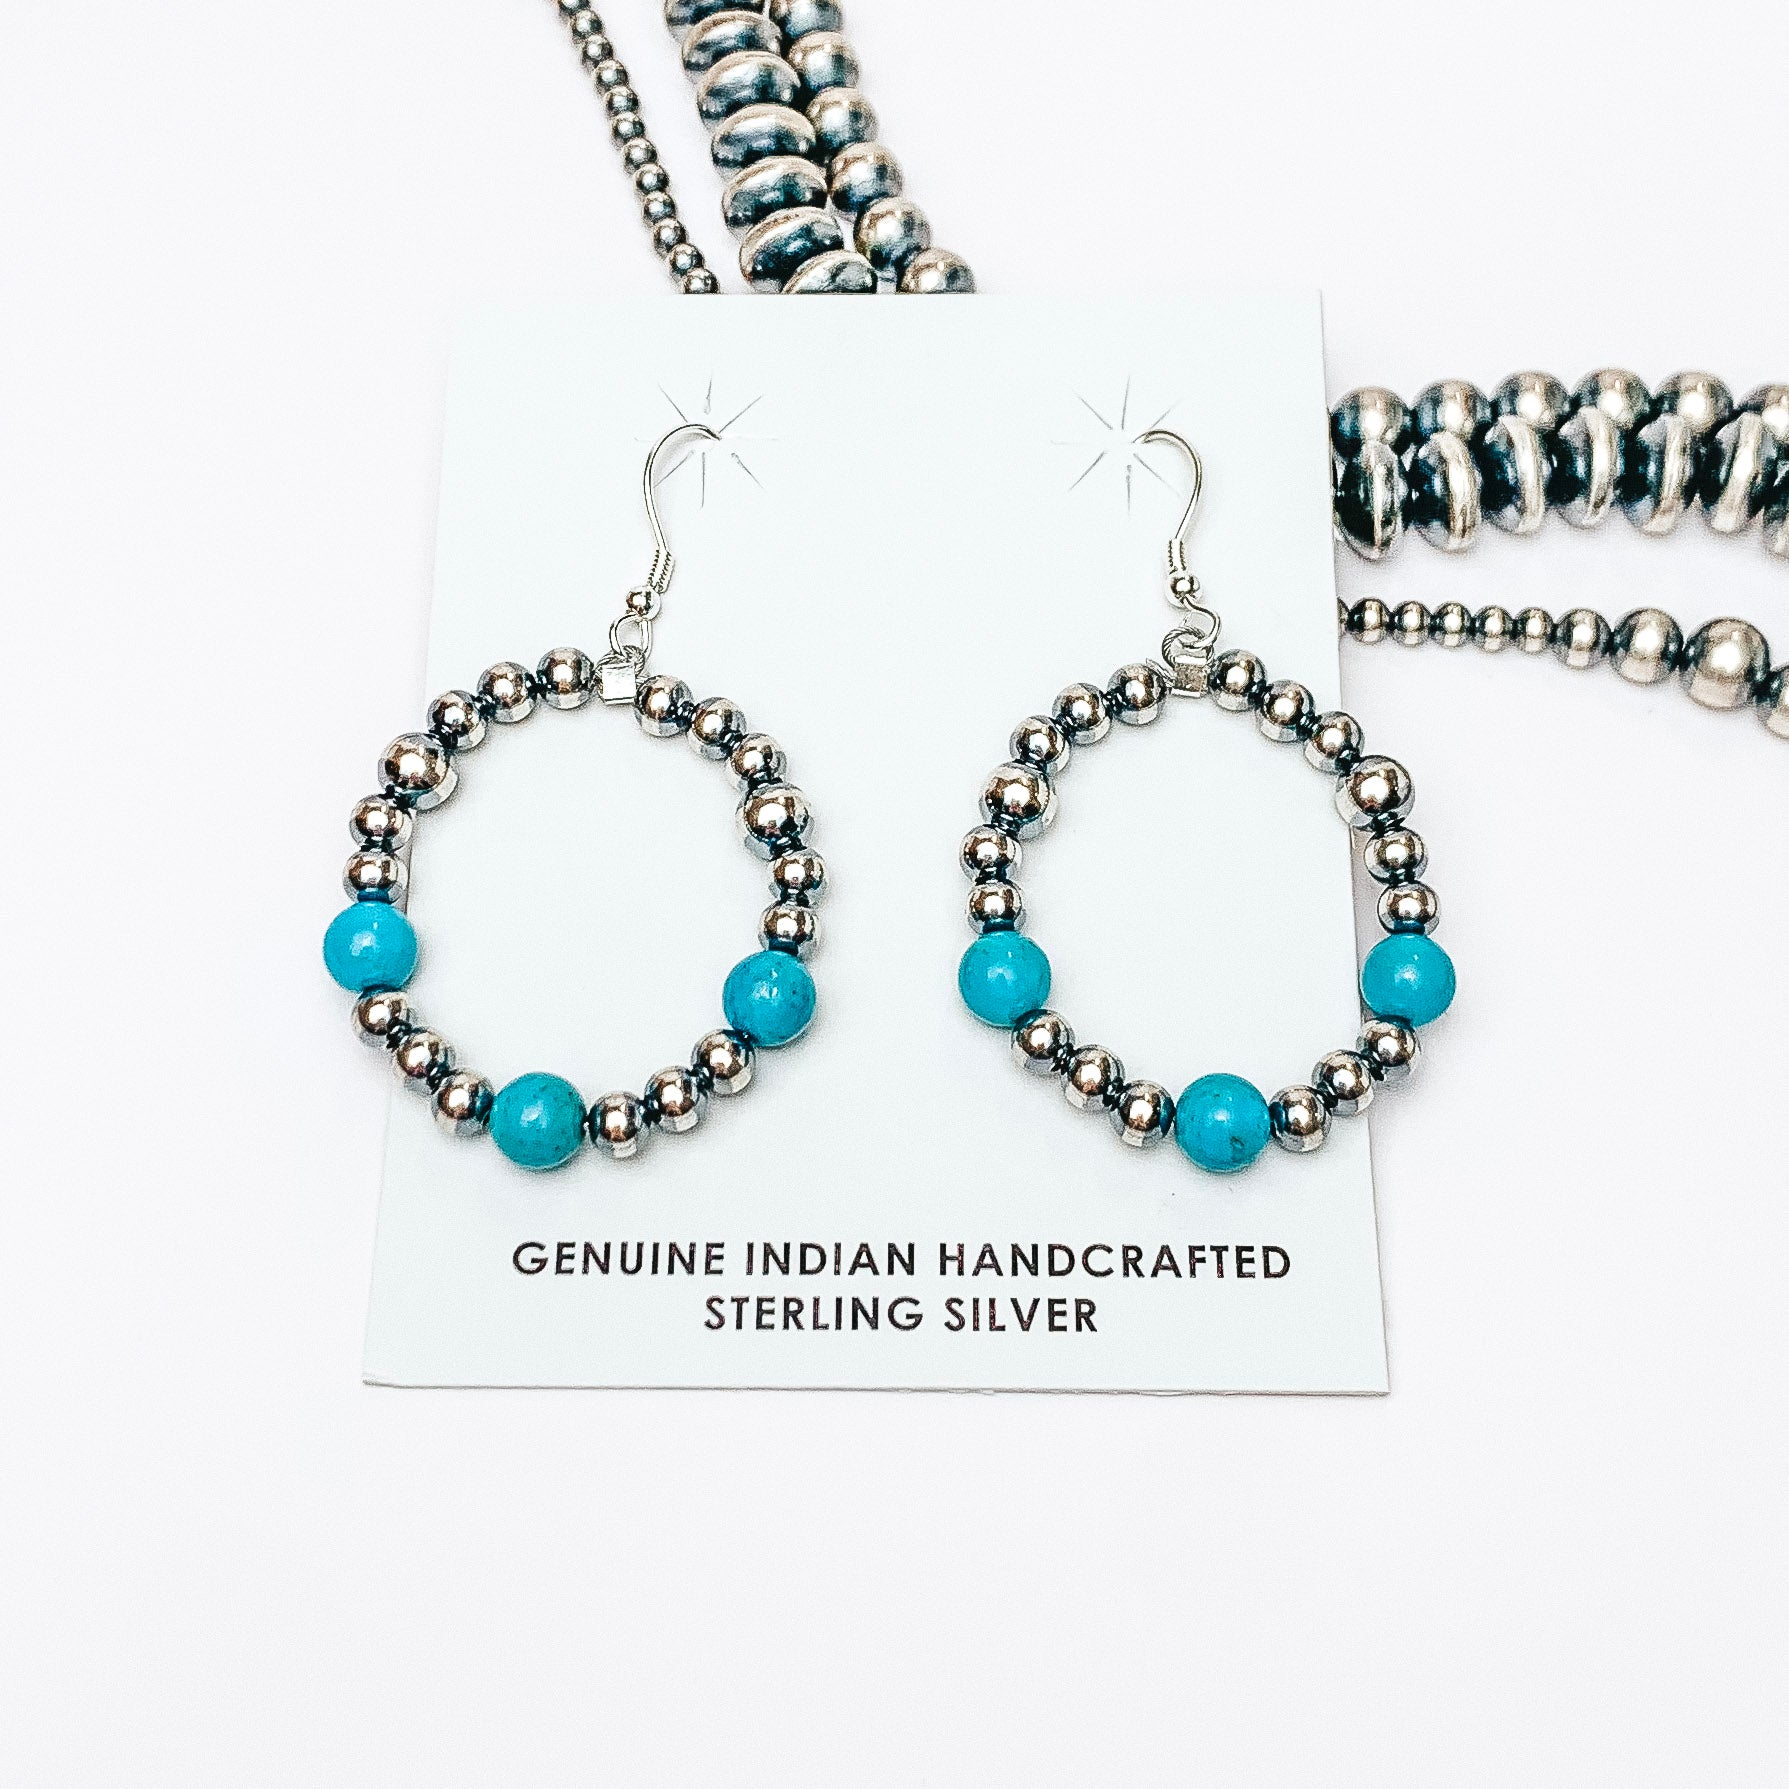 Centered in the picture are navajo pearl and turquoise drop earrings. Navajo pearls are in the background. 